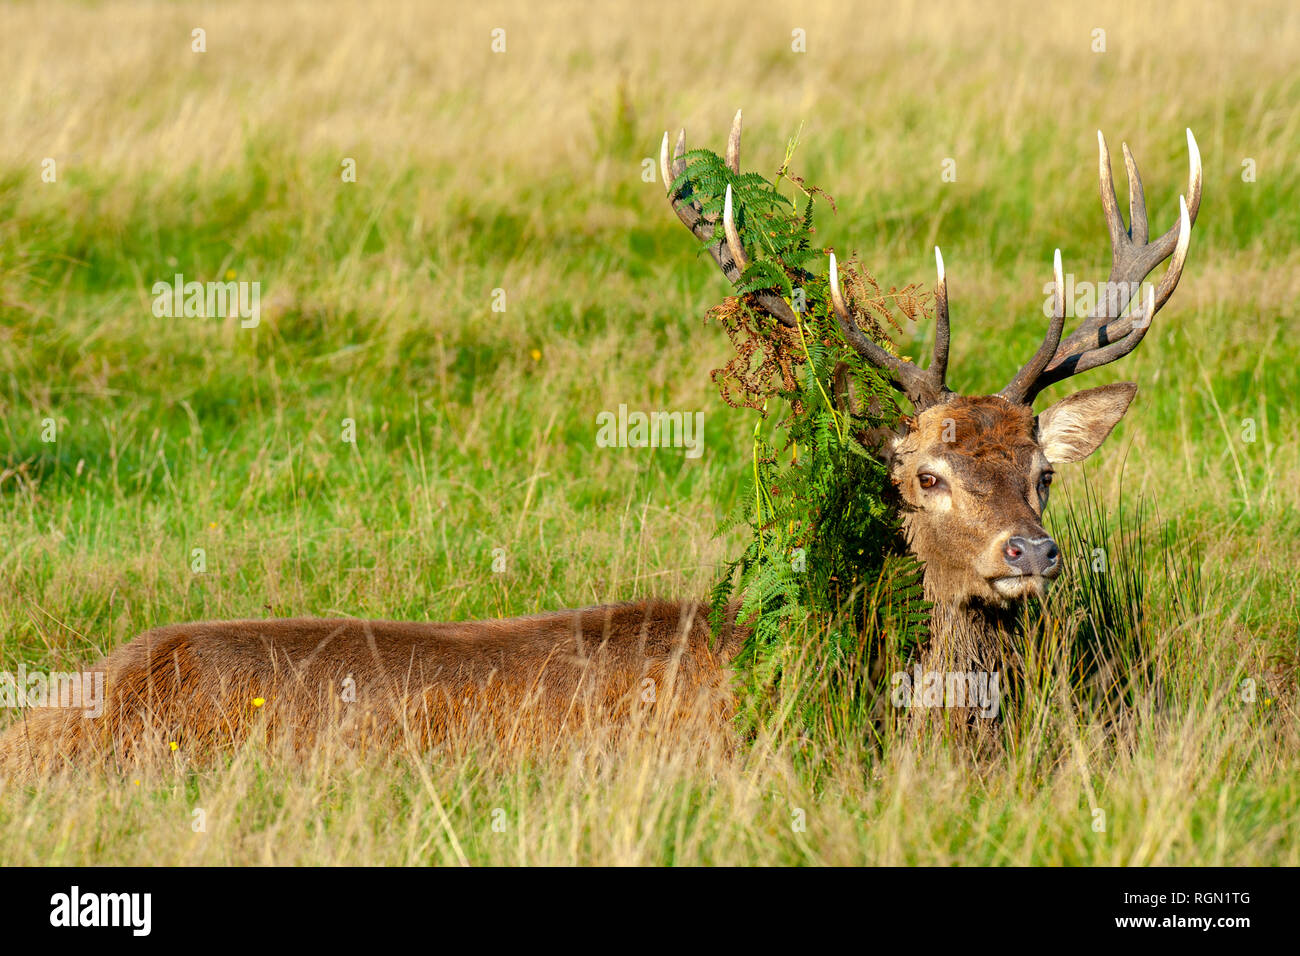 Close-up image of a Red Deer Stag -Cervus elaphus, during the rutting season with Bracken on his antlers Stock Photo